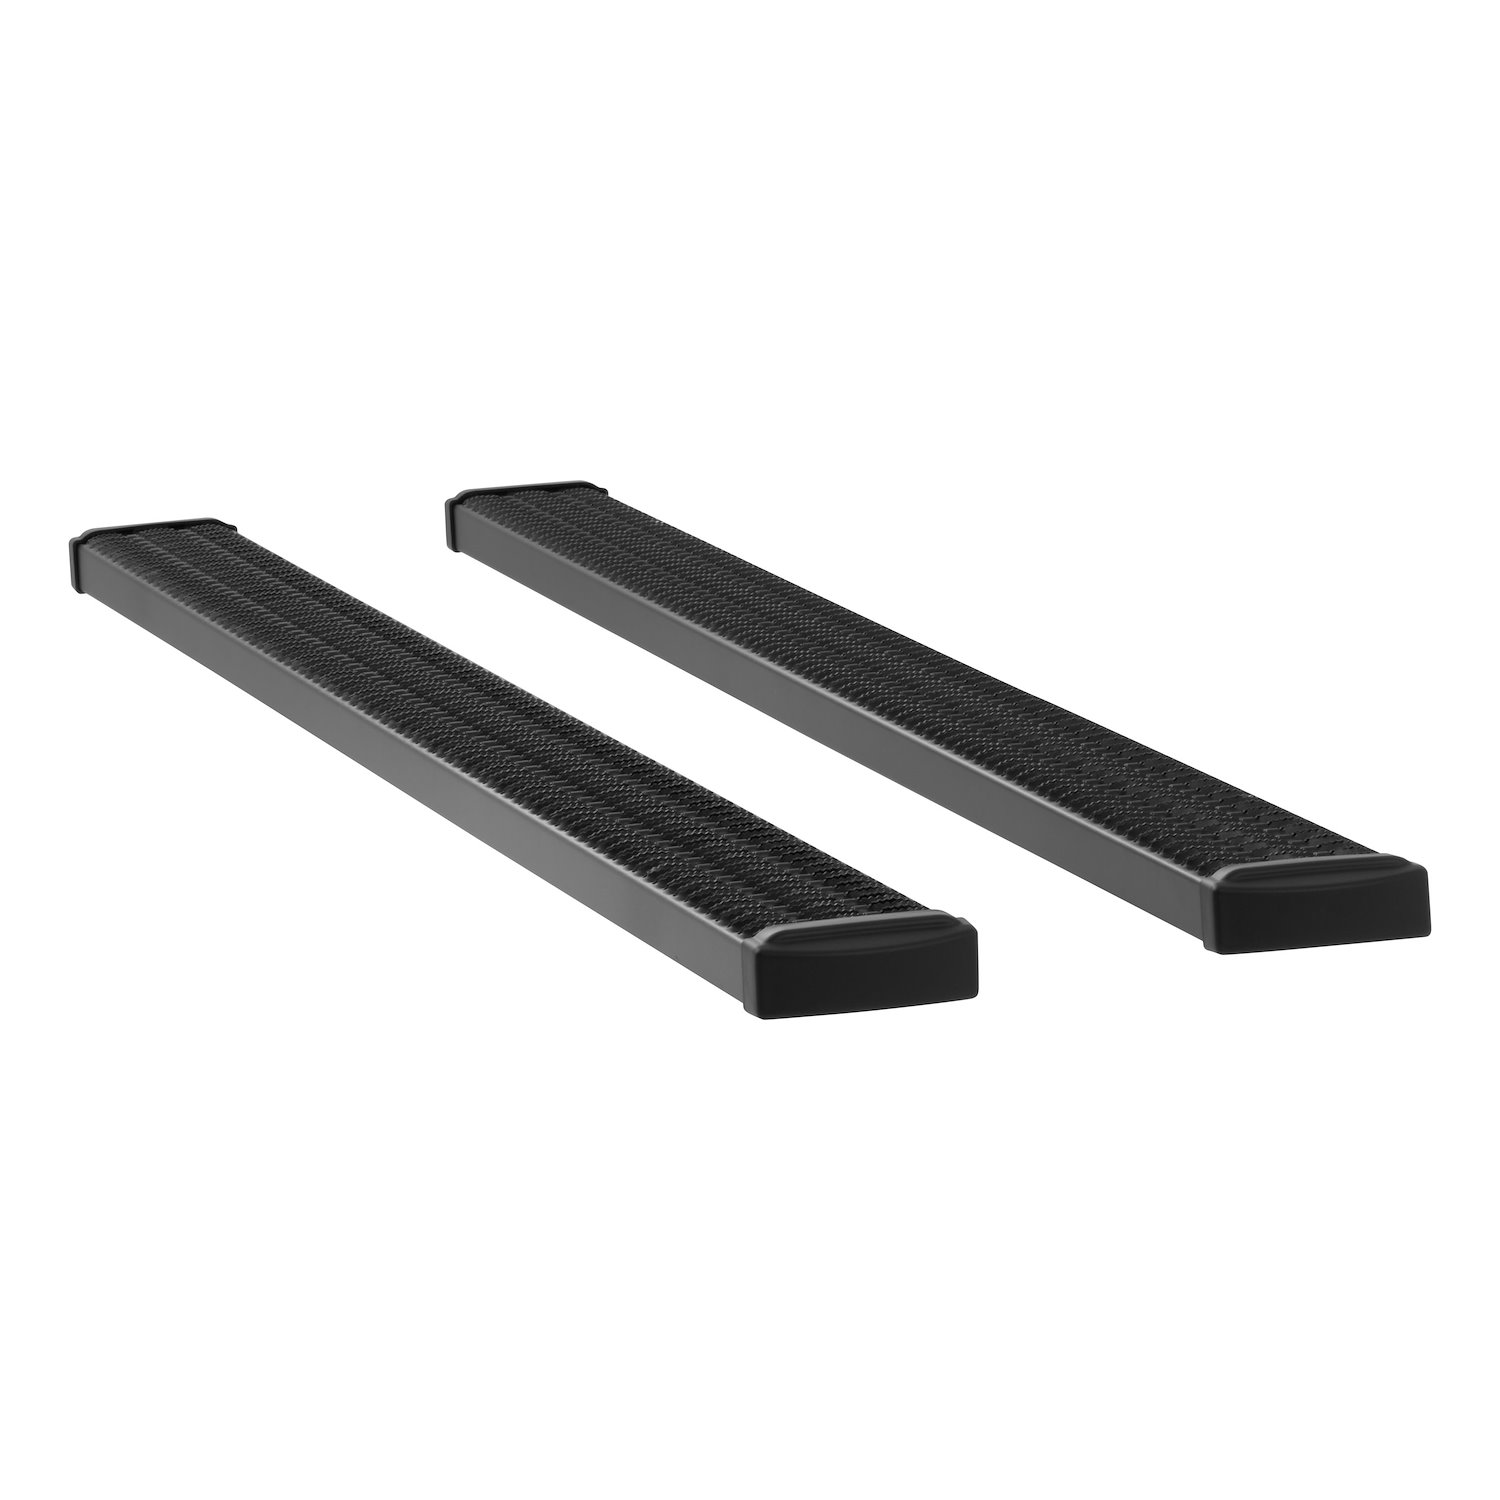 415098-401345 Grip Step 7 in. x 98 in. Black Aluminum Running Boards Fits Select Chevy Express, GMC Savana